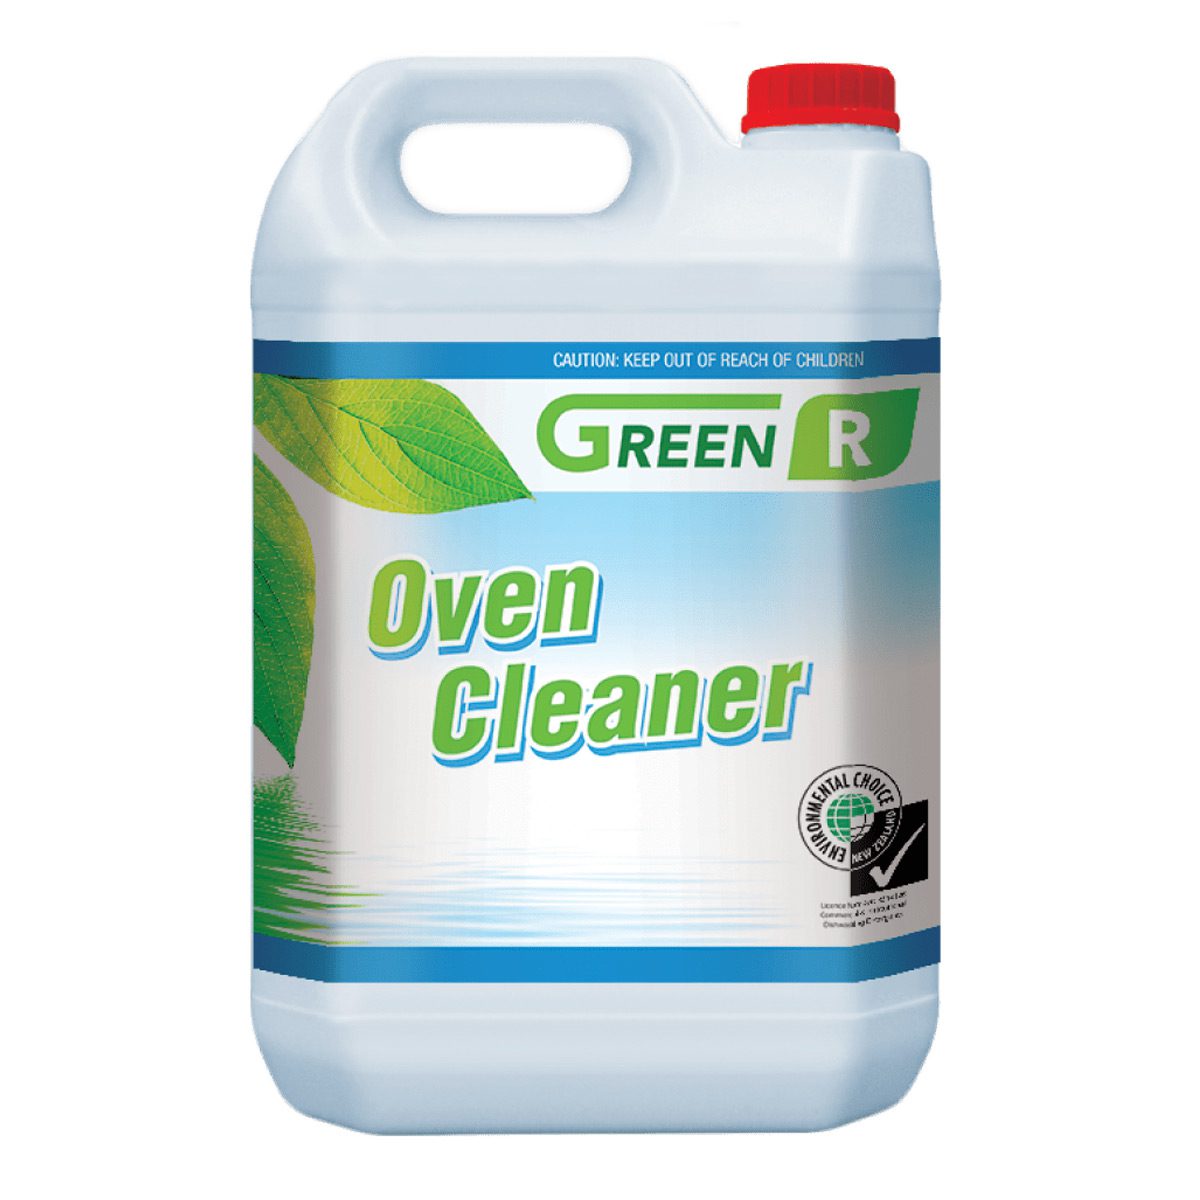 cleaning-products-kitchen-multipurpose-green-r-oven-cleaner-5L-clear-non-caustic-powerful-cleaner-for-cleaning-ovens-and-grills-vjs-distributors-GROC5